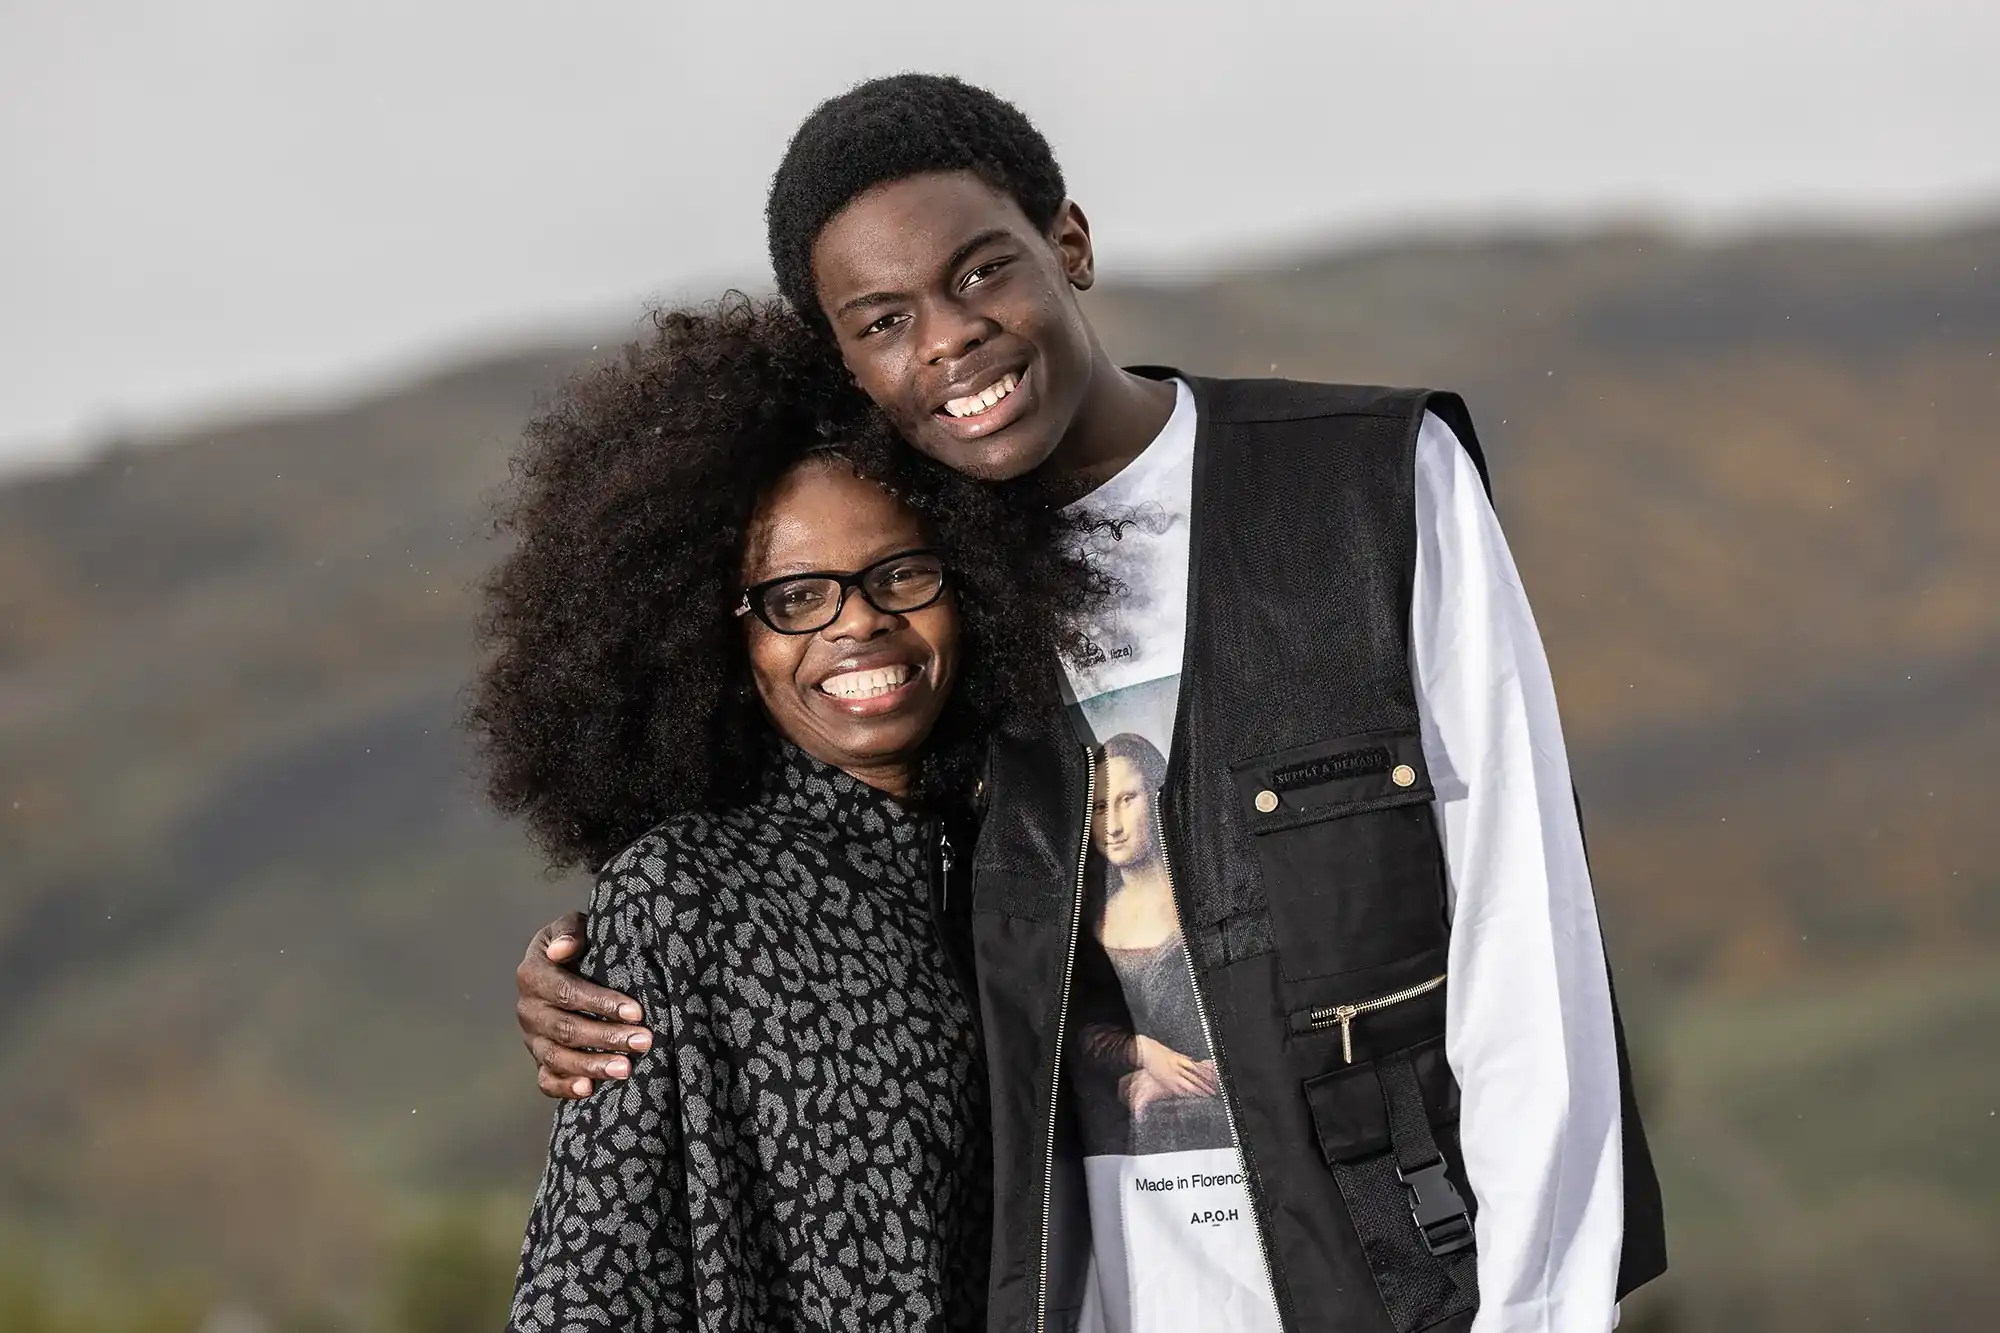 A smiling woman with curly hair and glasses is hugged by a taller smiling young man in front of a blurred outdoor background.